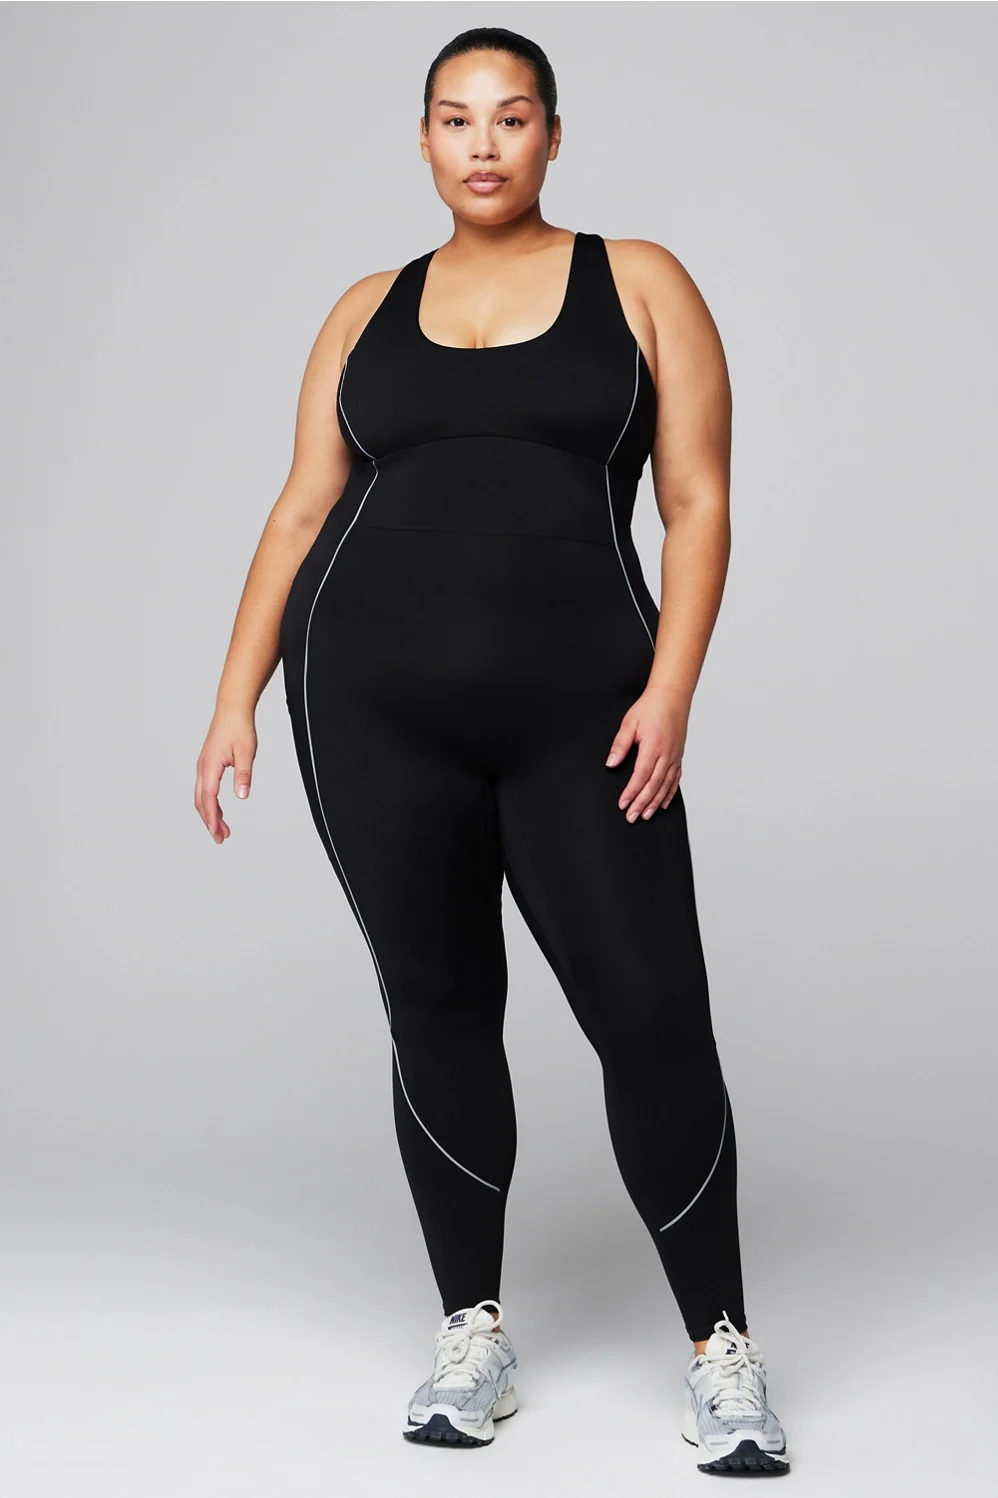 8 Plus Size Brands Upgrading Your Gymflow for 2017  Plus size activewear, Plus  size, Plus size outfits